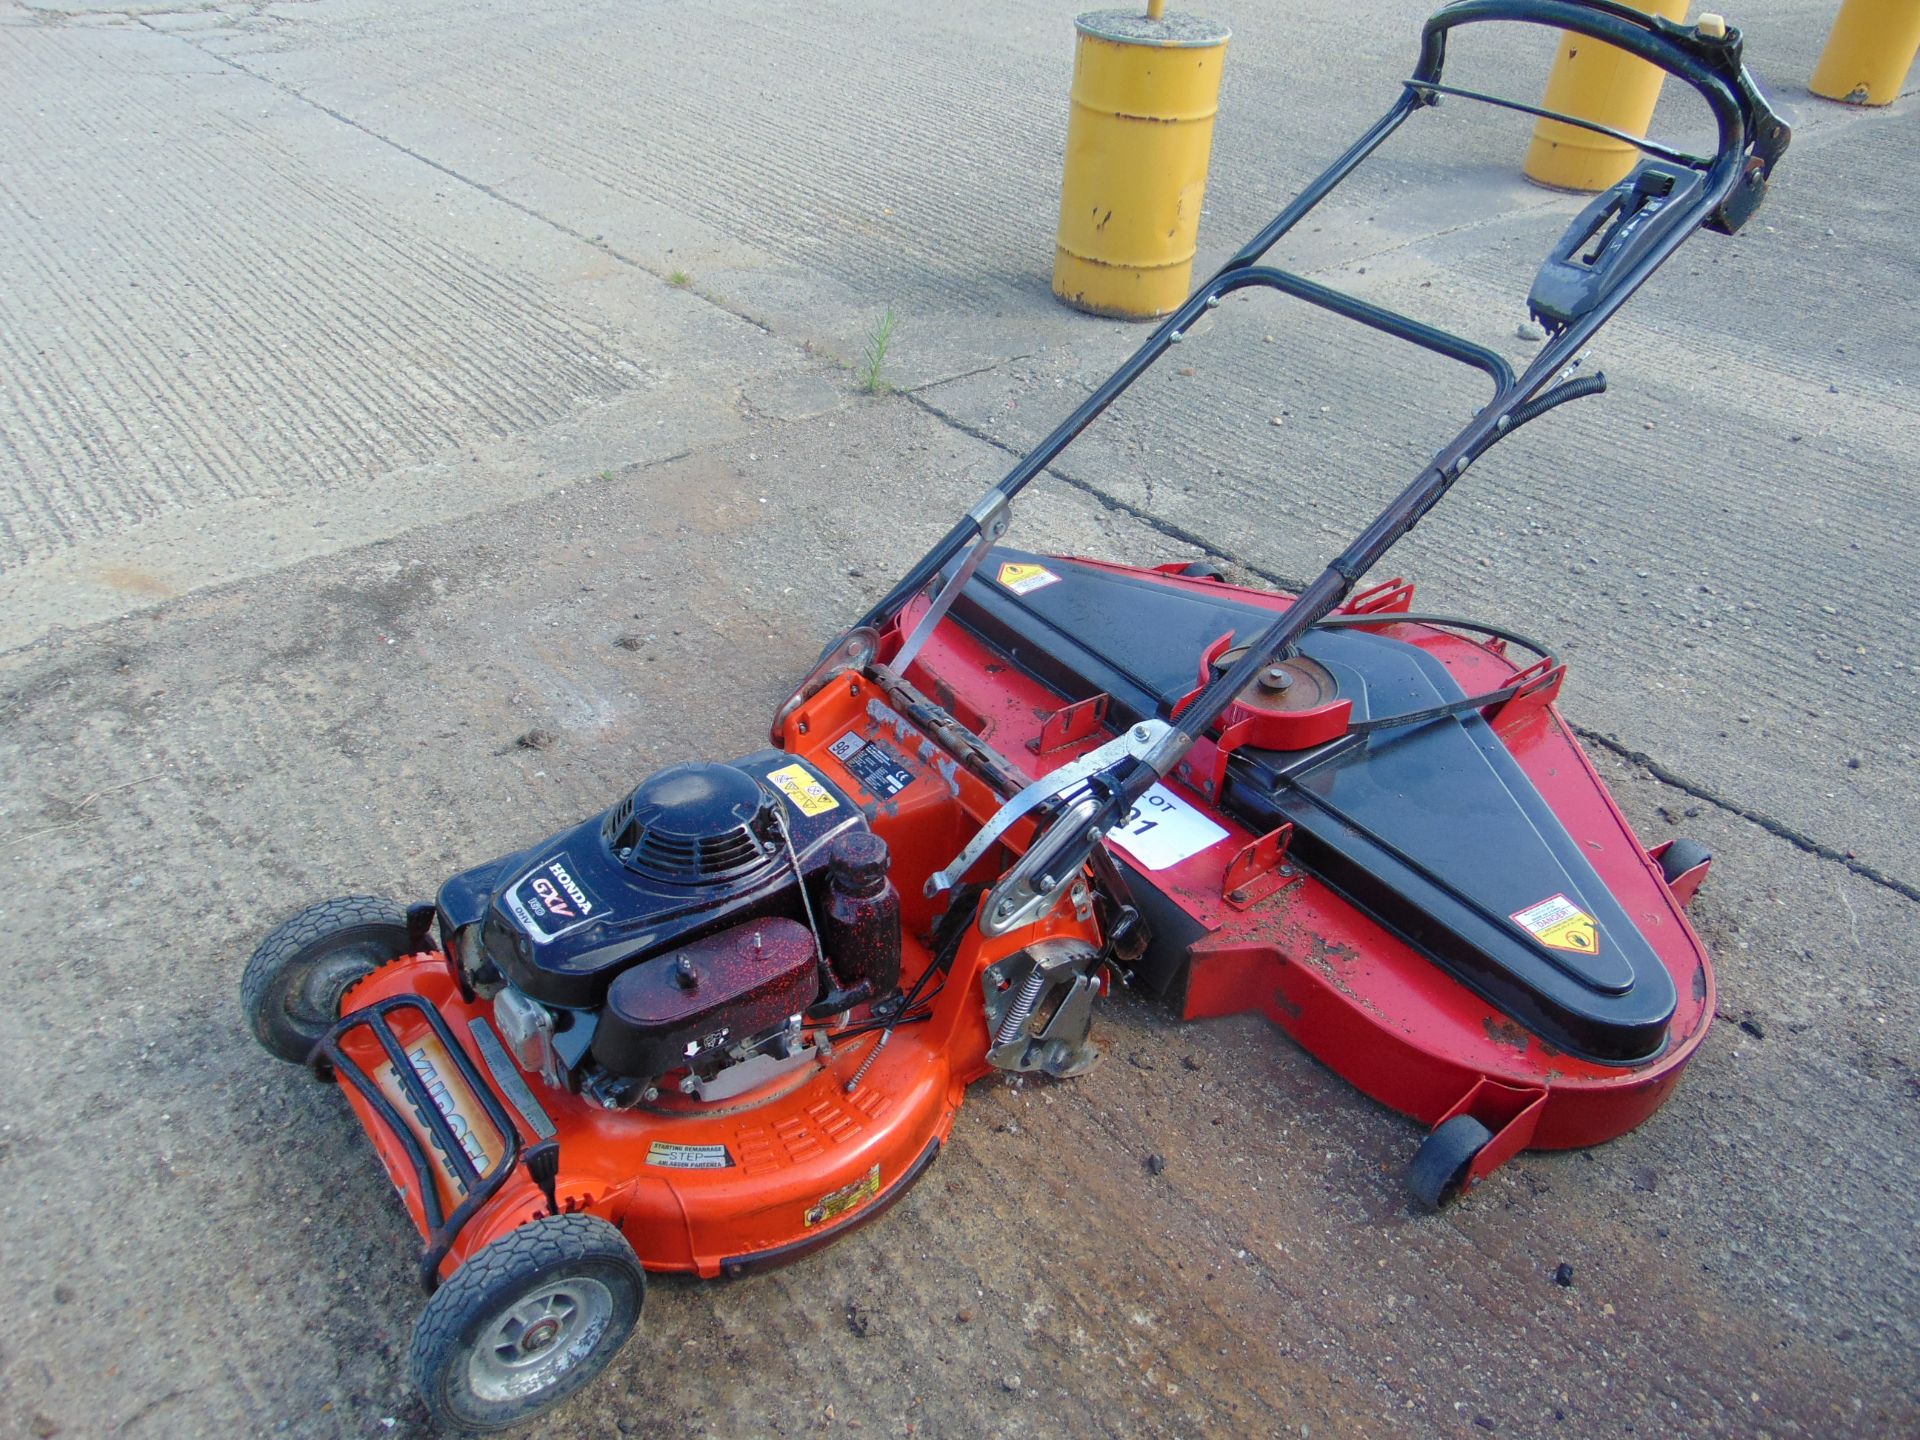 KUBOTA MOWER PLUS COUNTAX 48 INCHES MOWER DECK FROM COUNTY COUNCIL